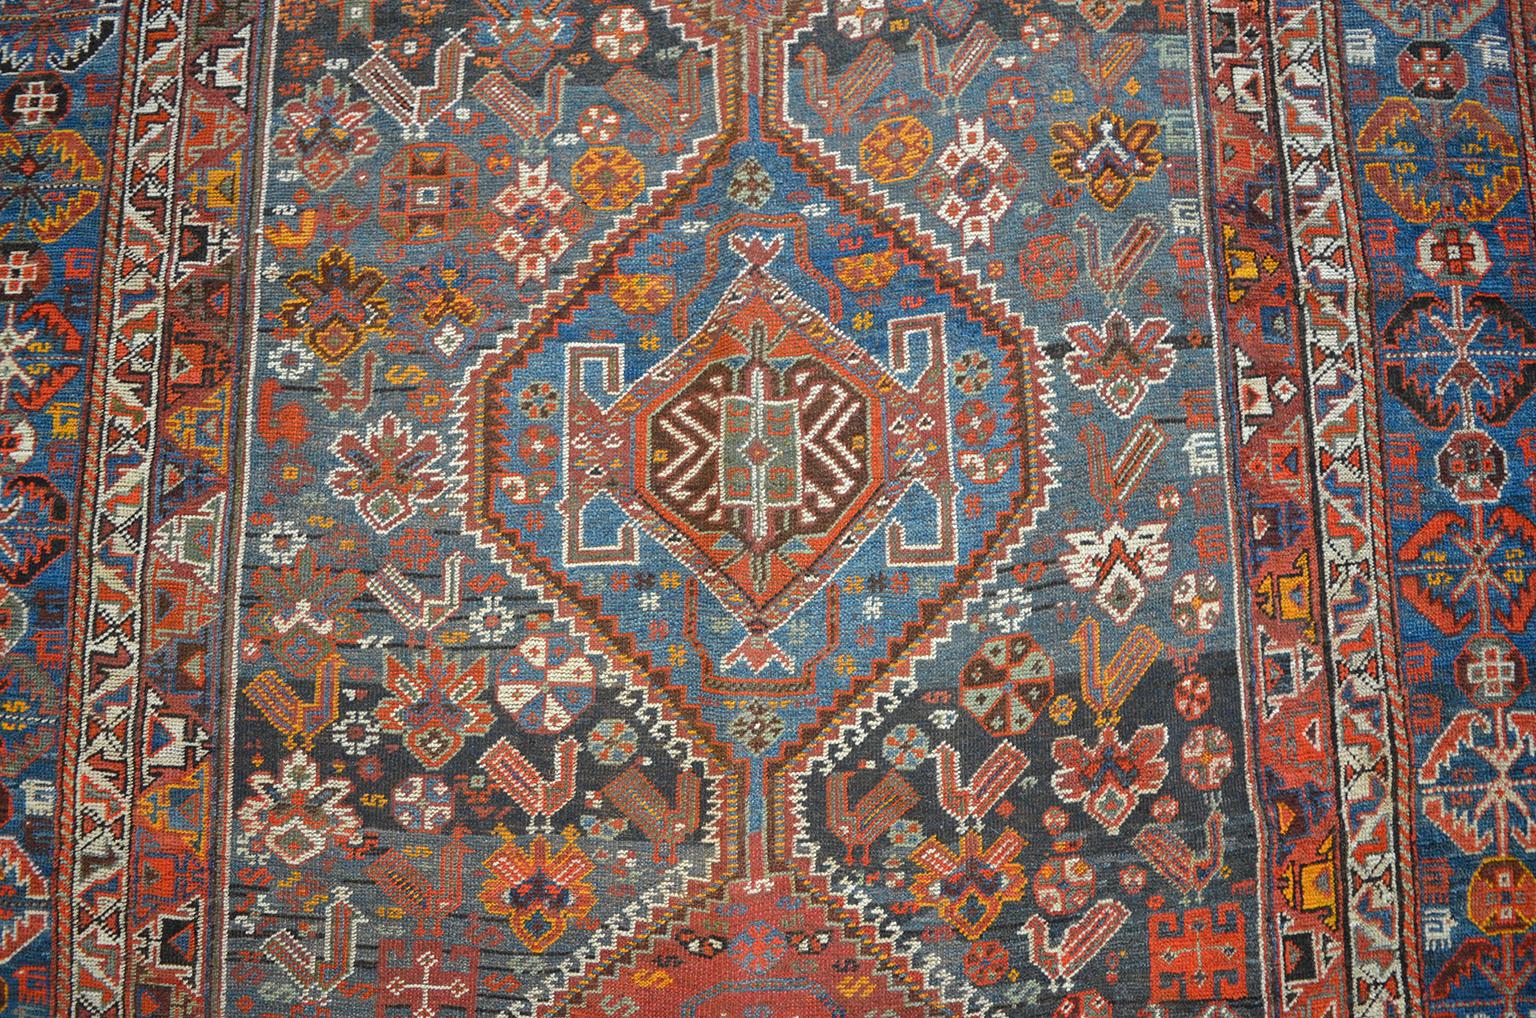 This Persian Qashqai Neriz carpet, circa 1880, consists of a pure handspun wool warp, weft and hand knotted pile and organic vegetable dyes. The Classic Qashqai geometric style with multiple medallions can be seen in this carpet alongside smaller